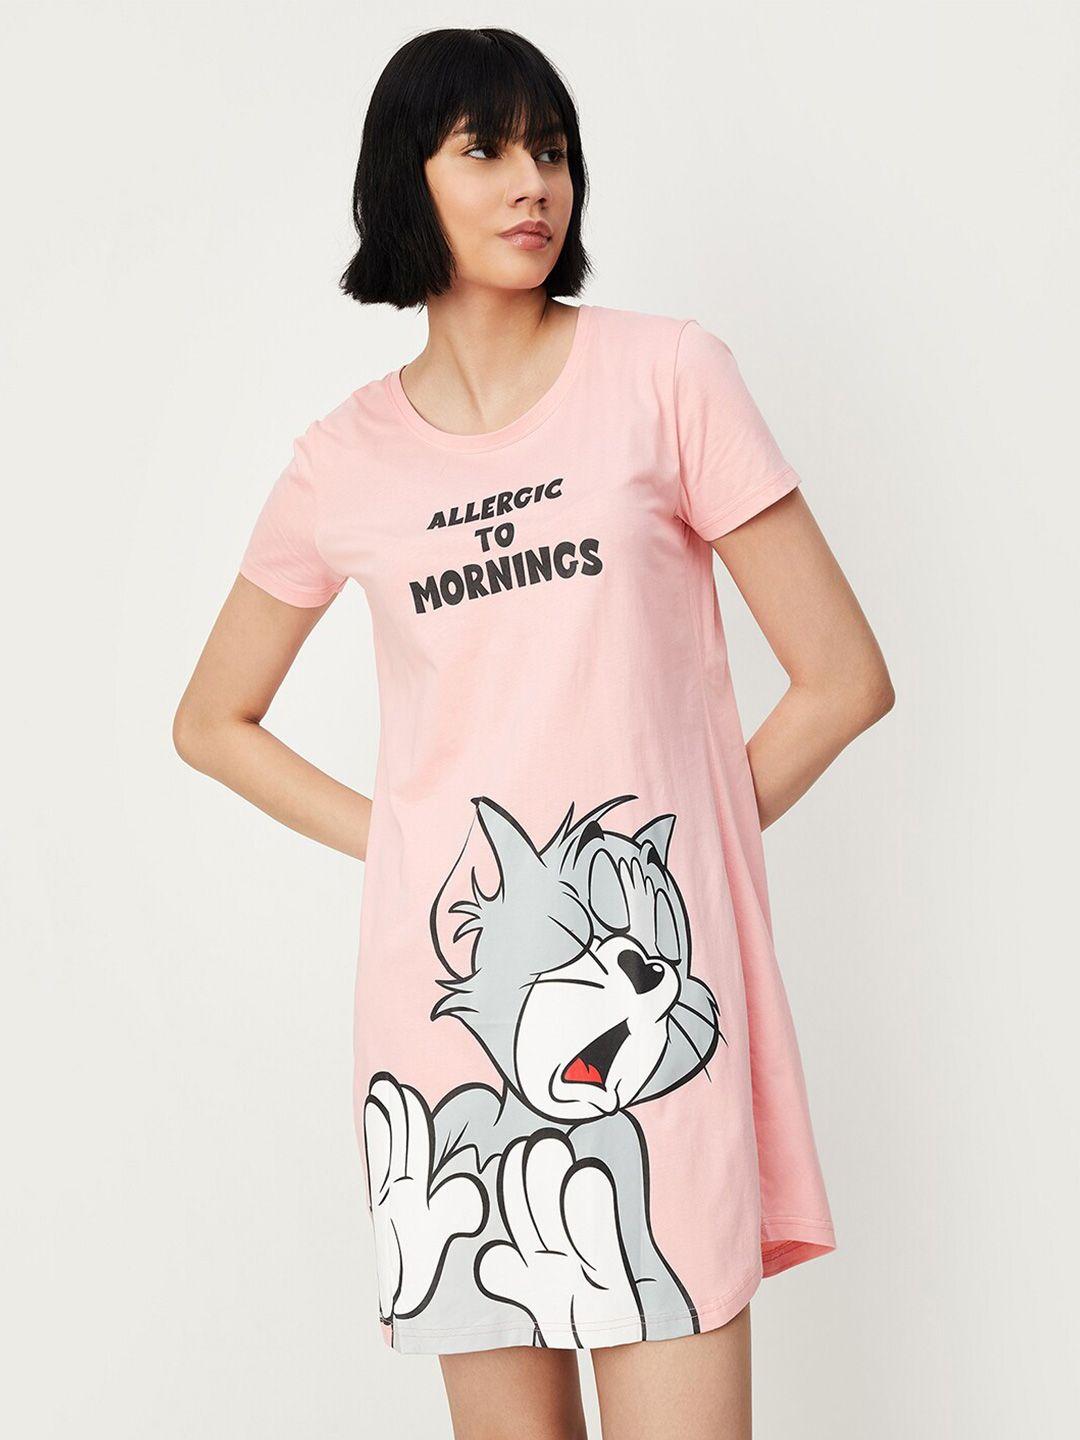 max-cartoon-characters-tom-printed-round-neck-pure-cotton-t-shirt-nightdress